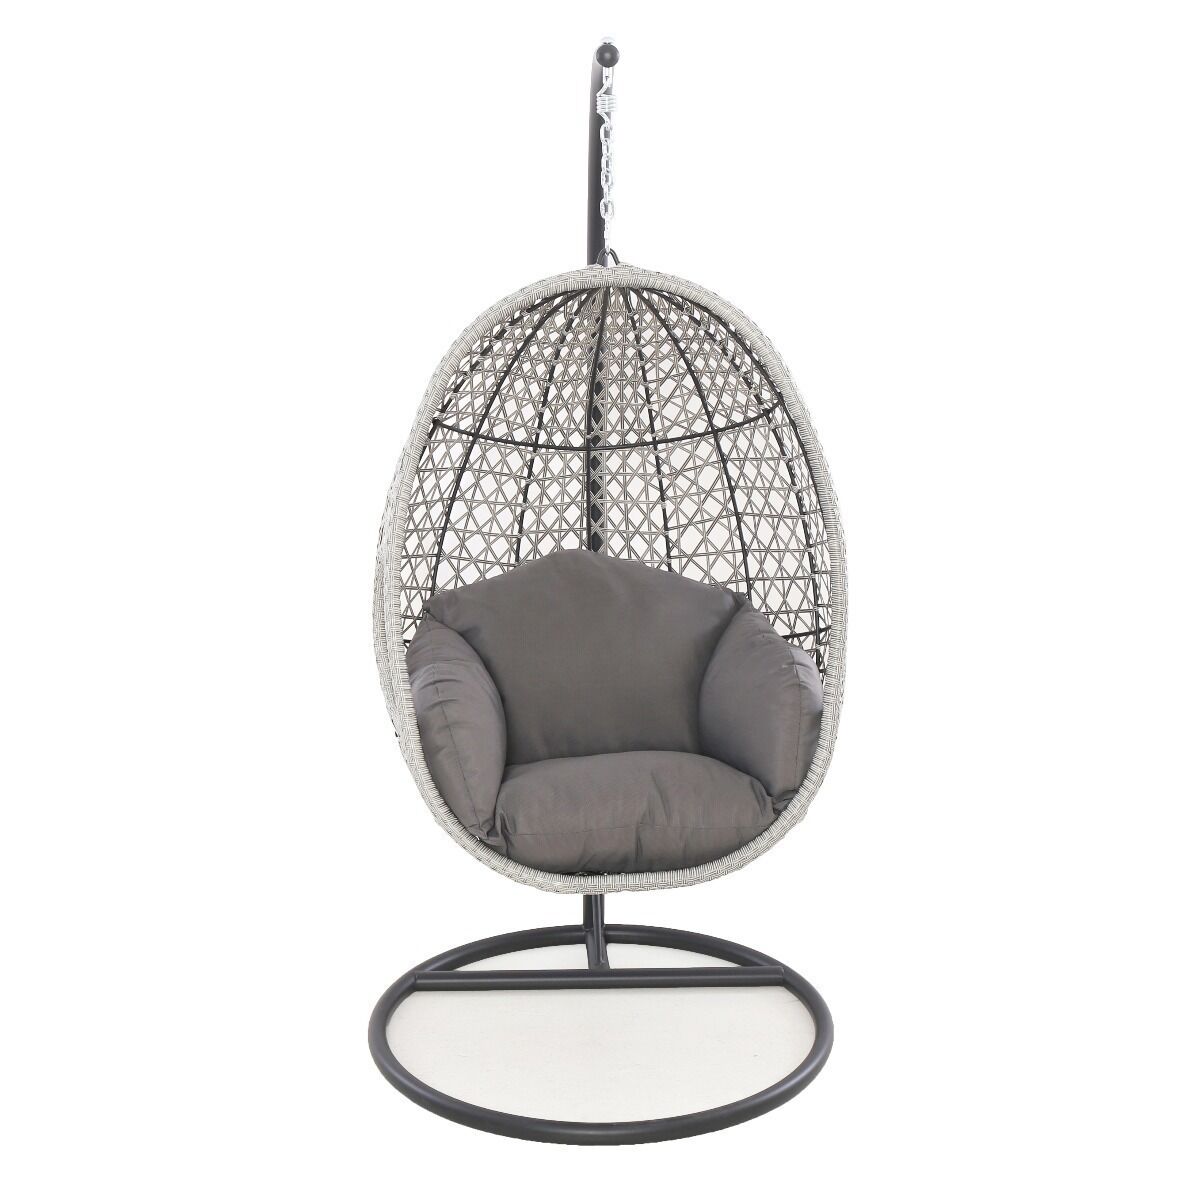 Maze - Ascot Rattan Hanging Chair with Weatherproof Cushions product image